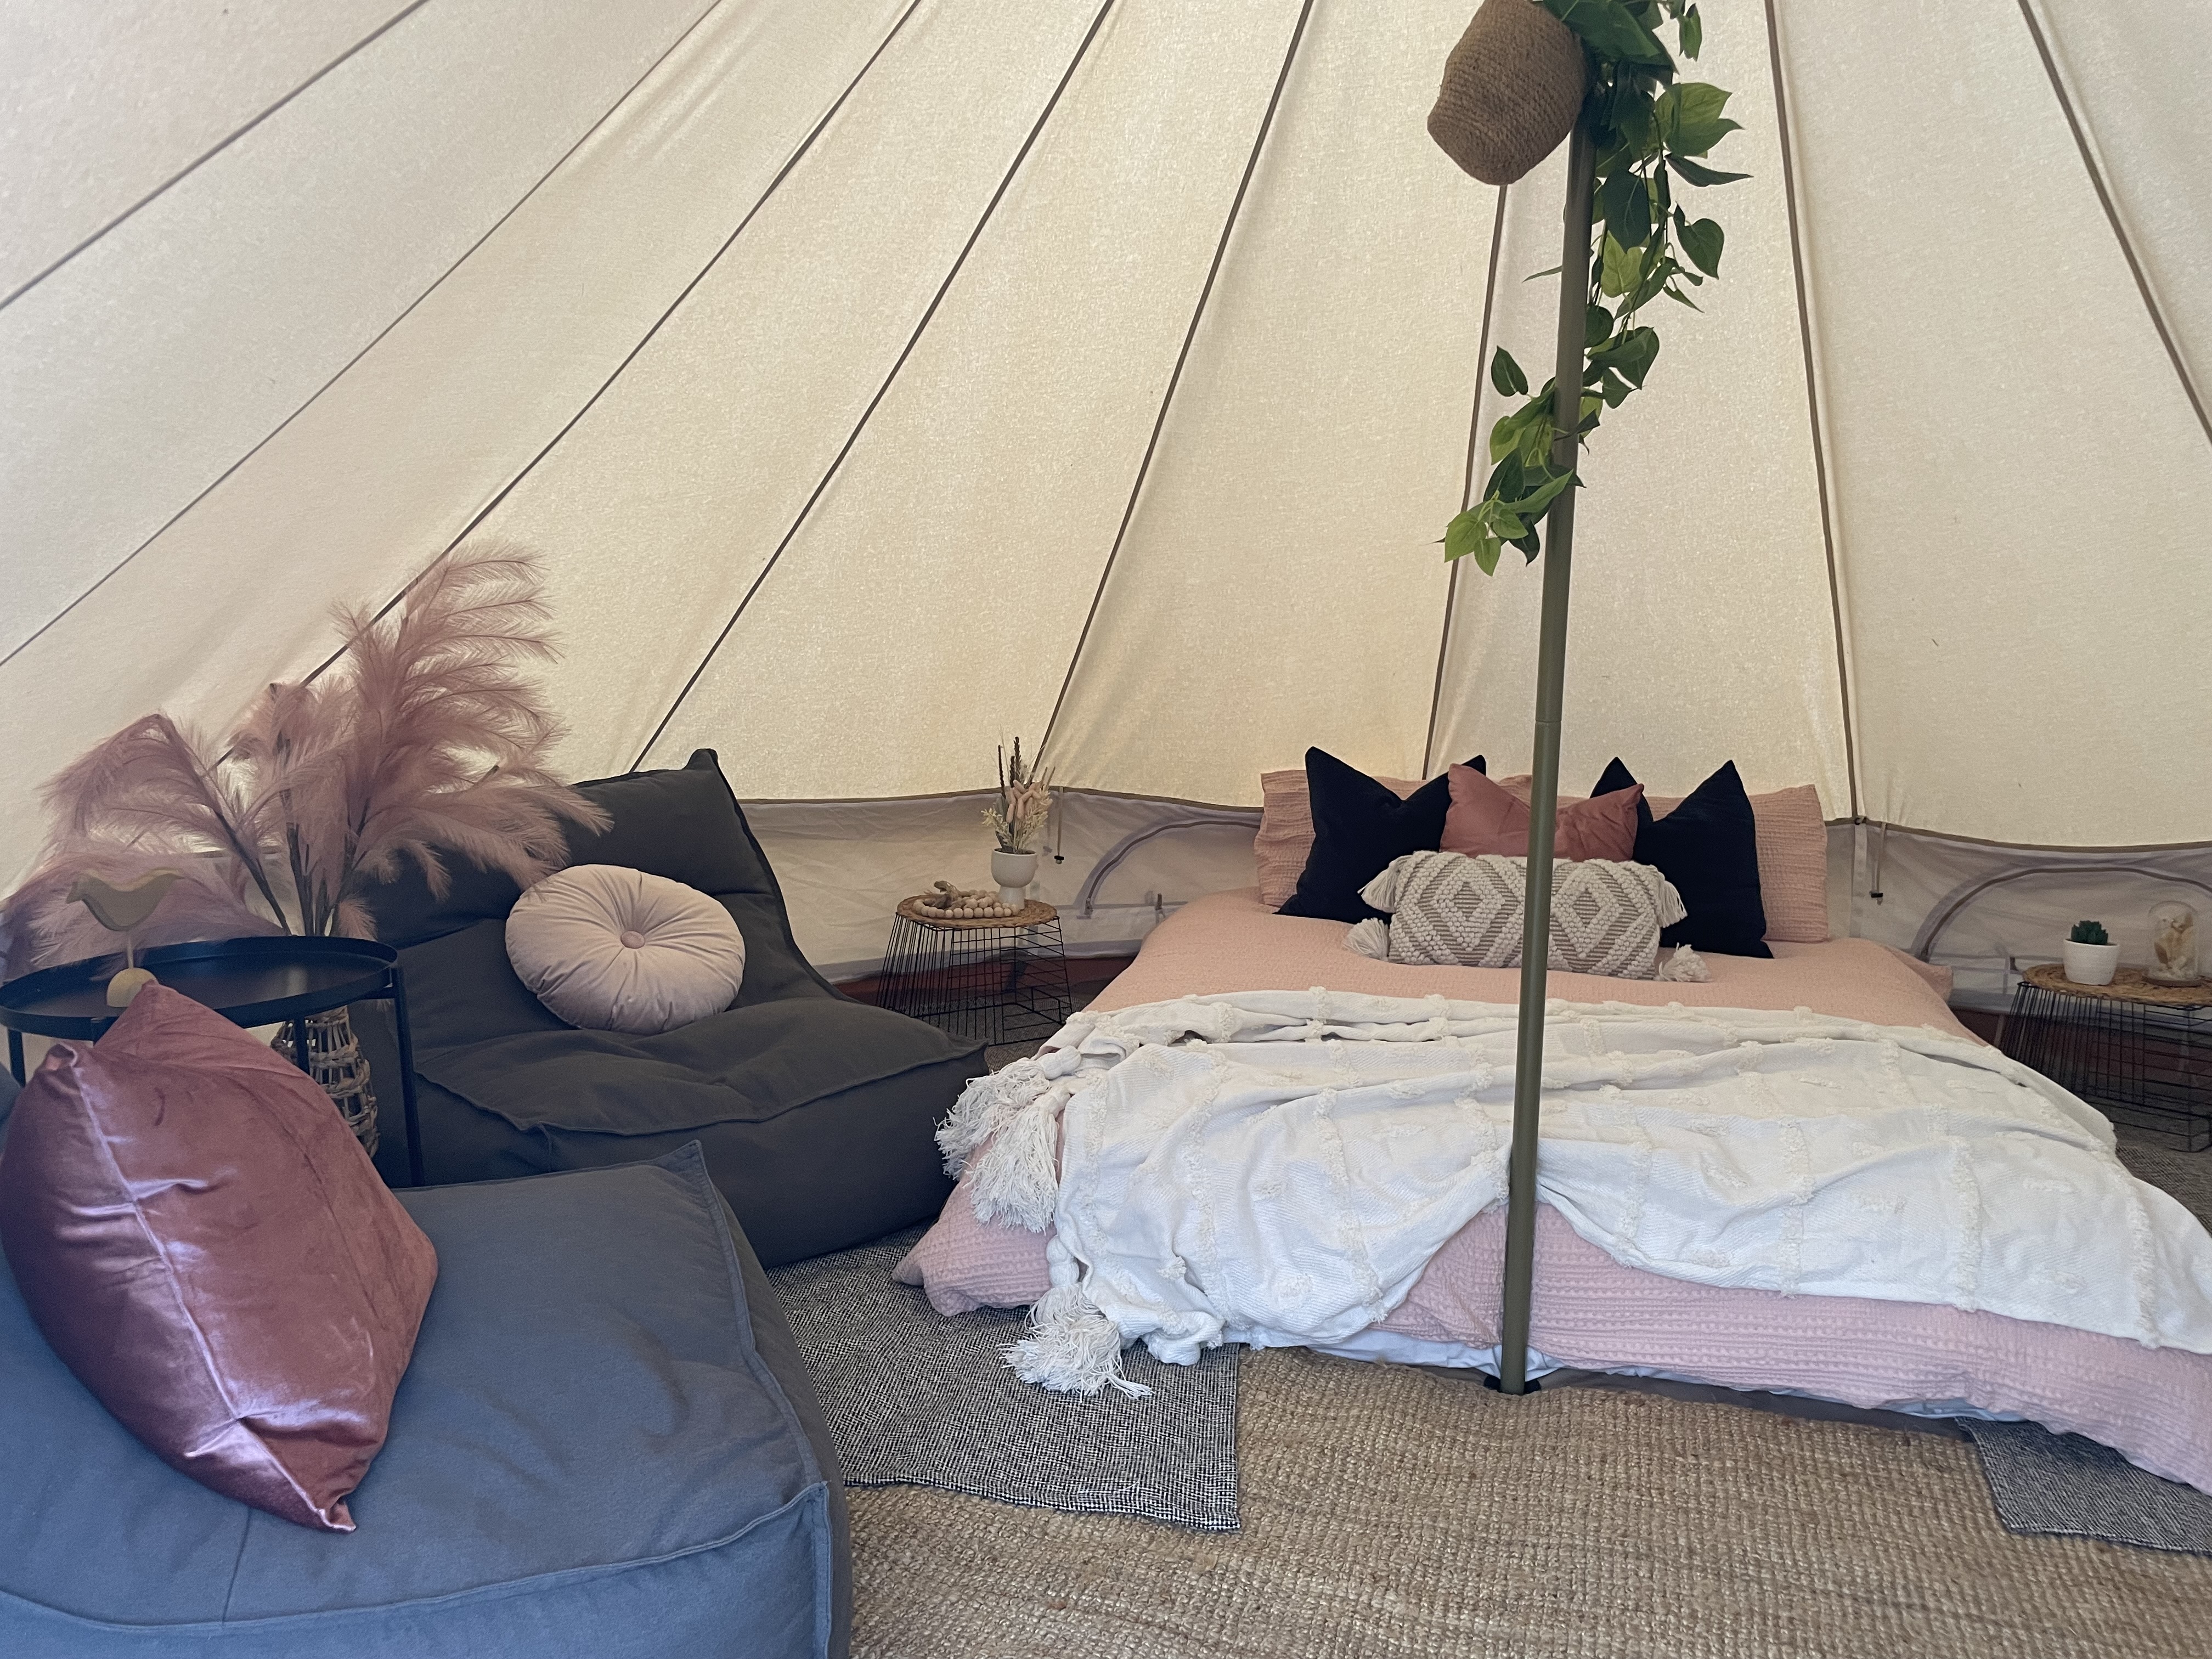 GLAMPING TENT